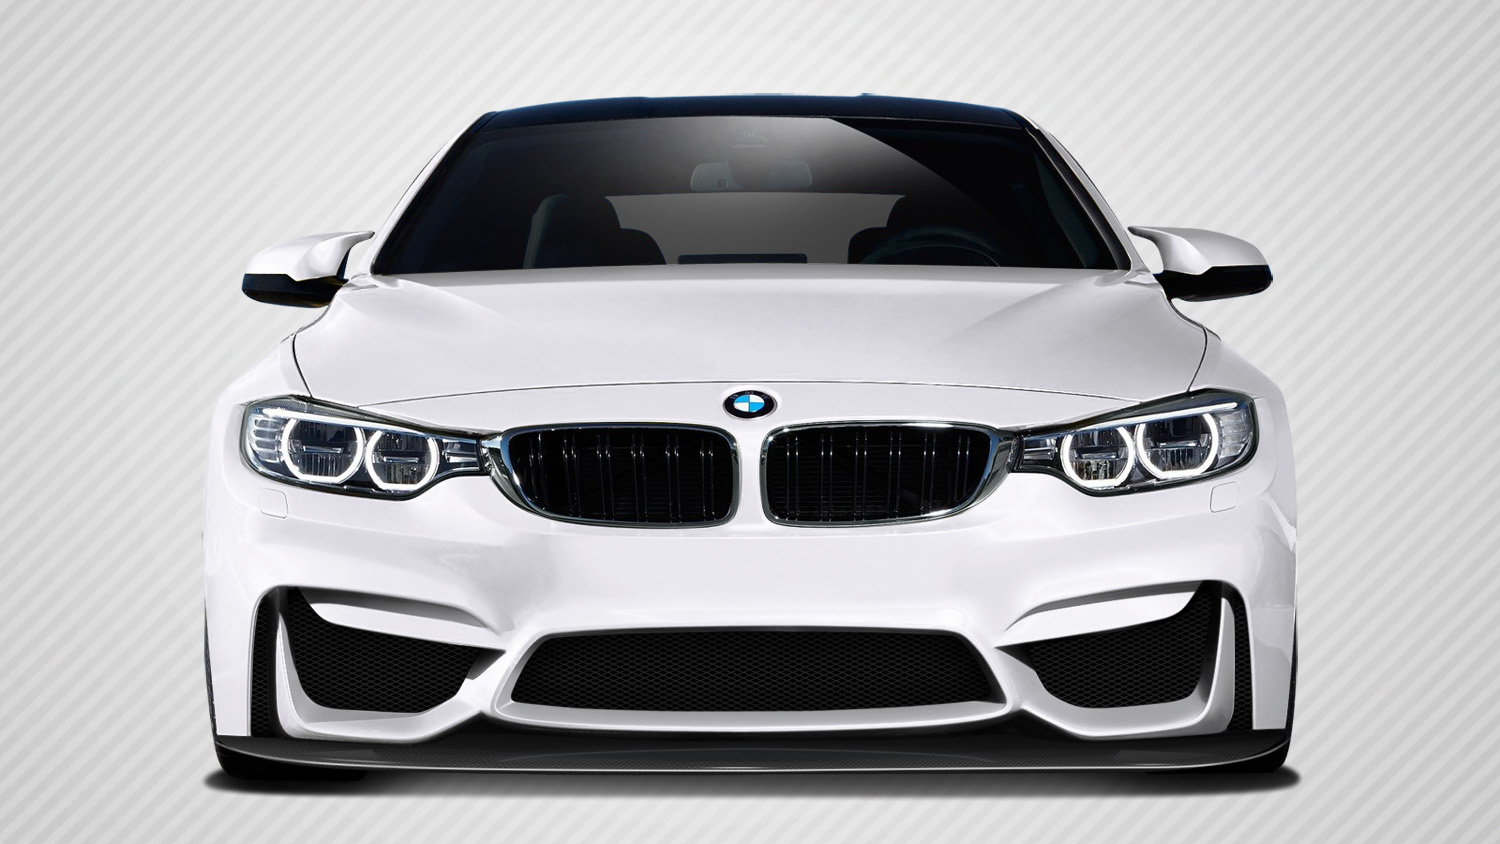 Front Bumper Bodykit for 2015 BMW 4 Series ALL - BMW 4 Series F32 Carbon Creations M4 Look Front Splitter ( must be used with M3 Look front bumper )